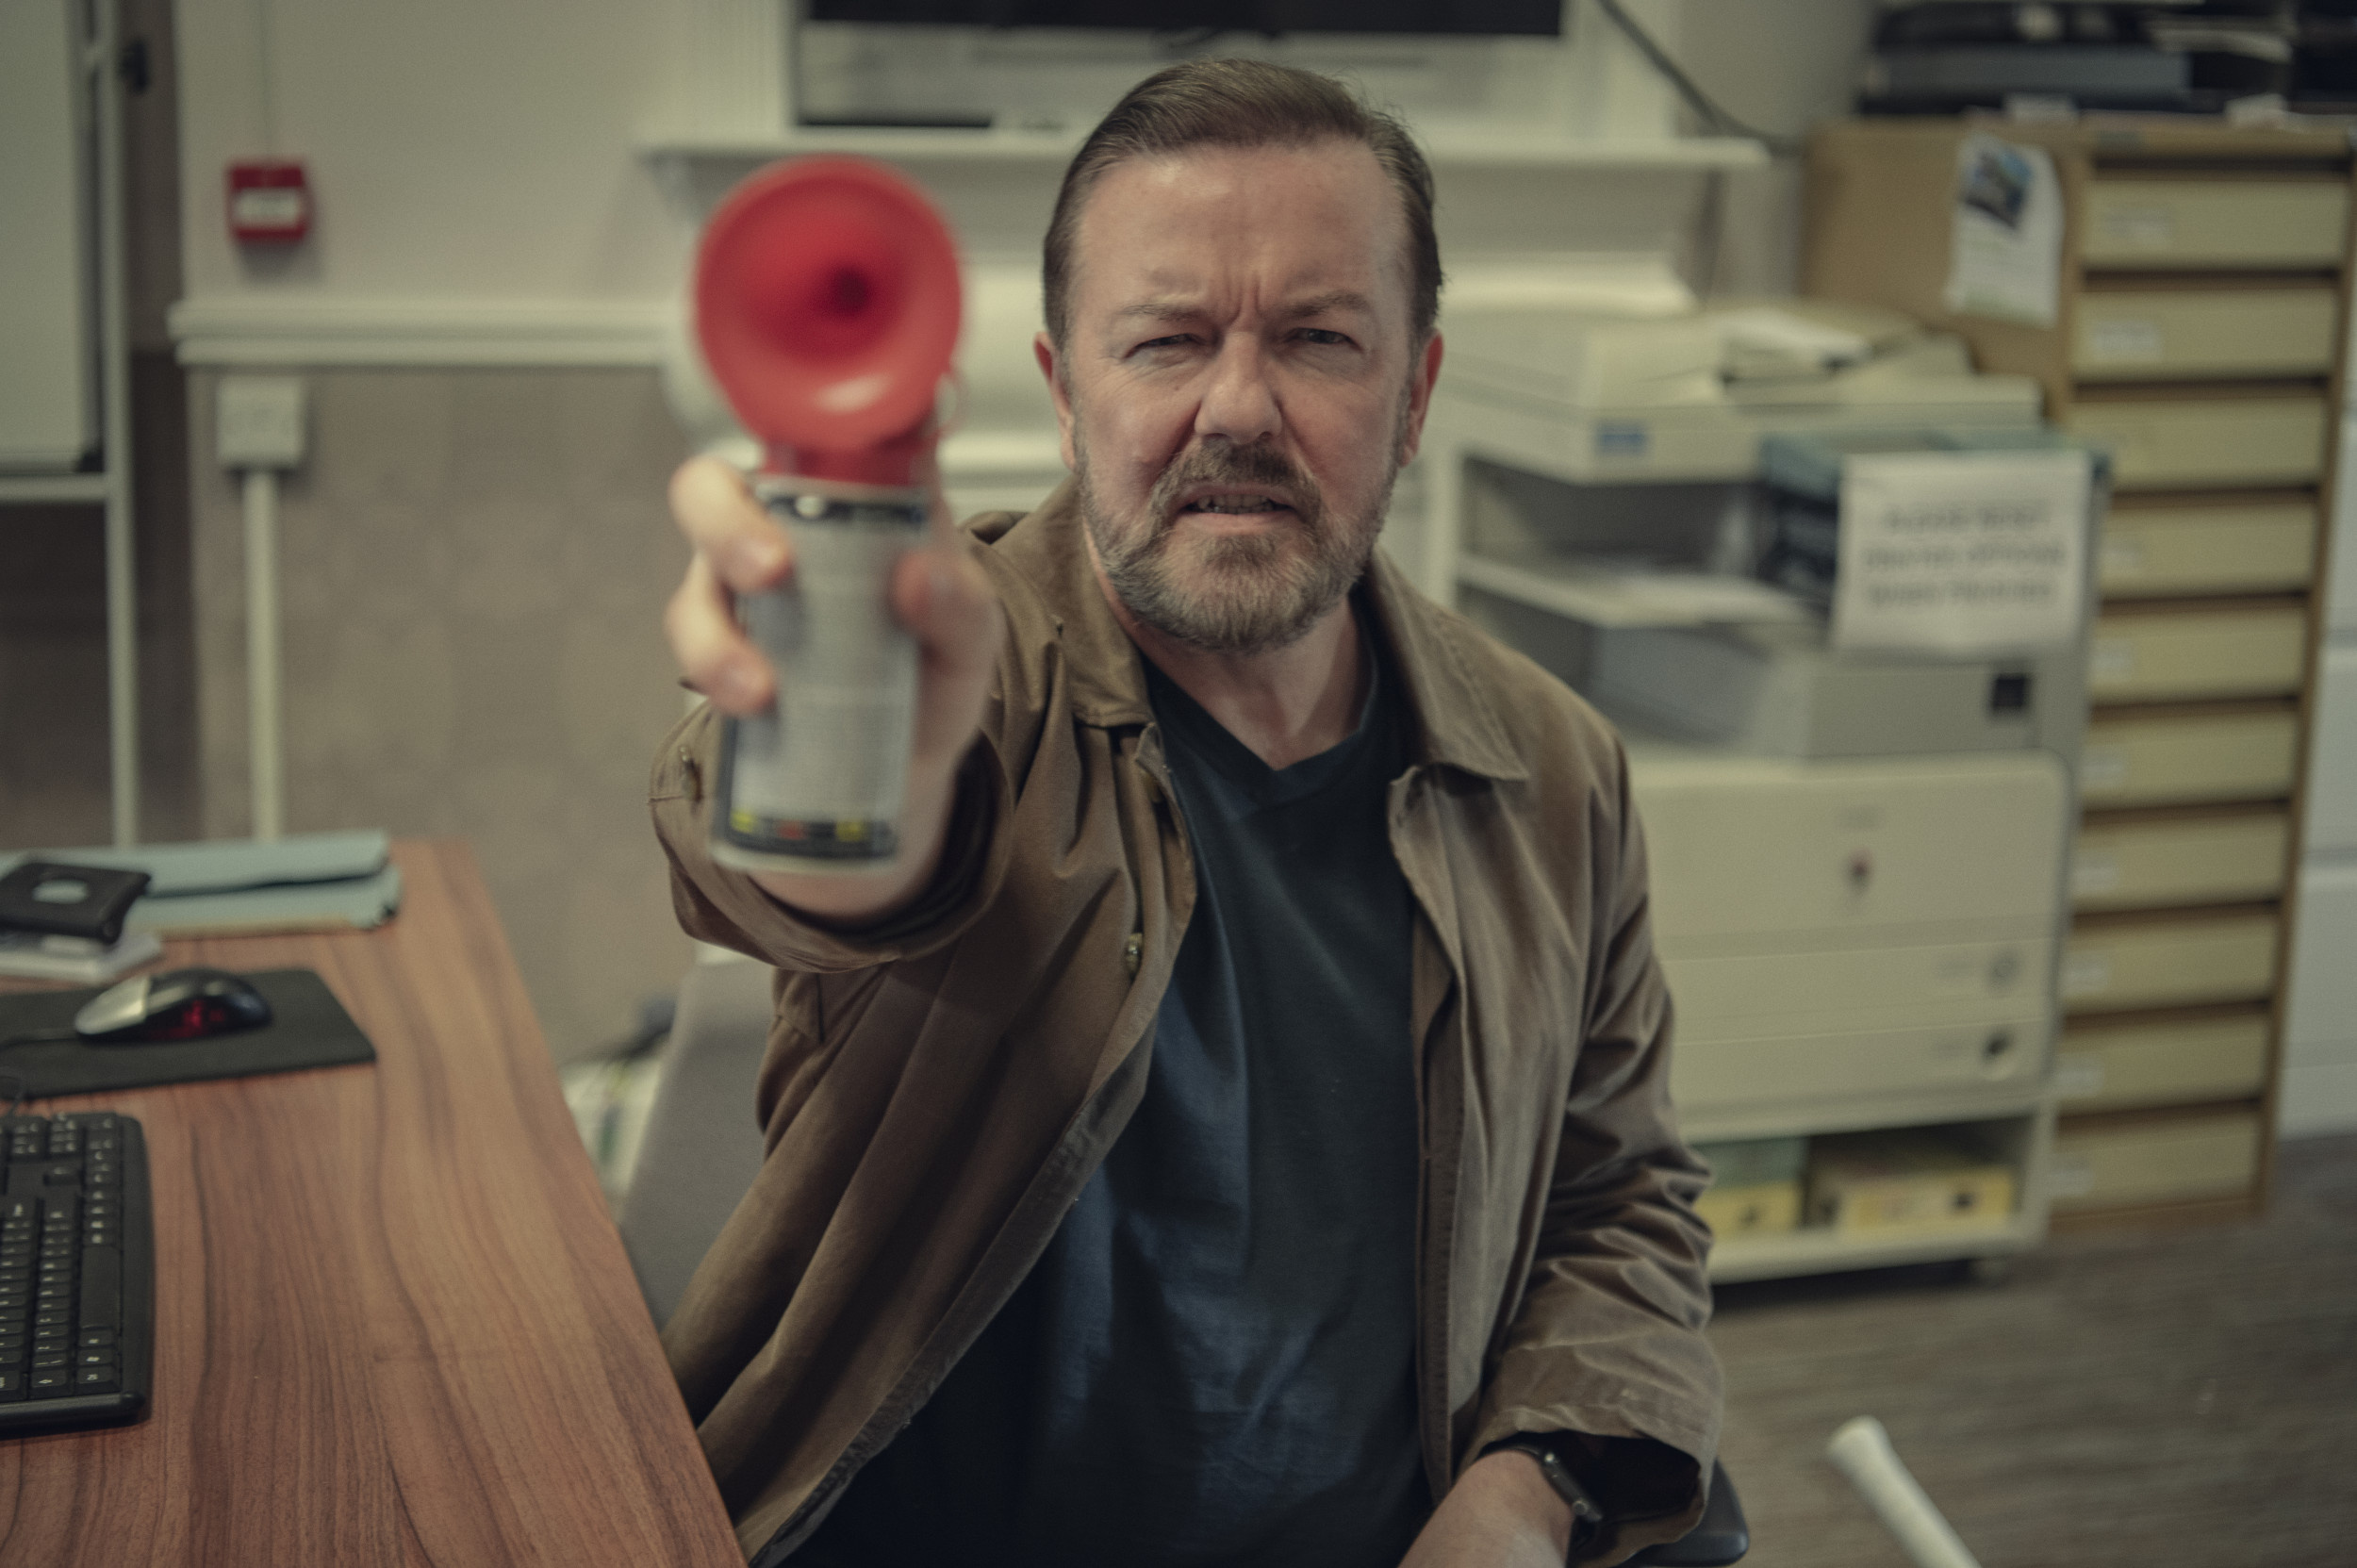 Life After Life series, Season 3 cast, Ricky Gervais, Characters introduction, 2500x1670 HD Desktop